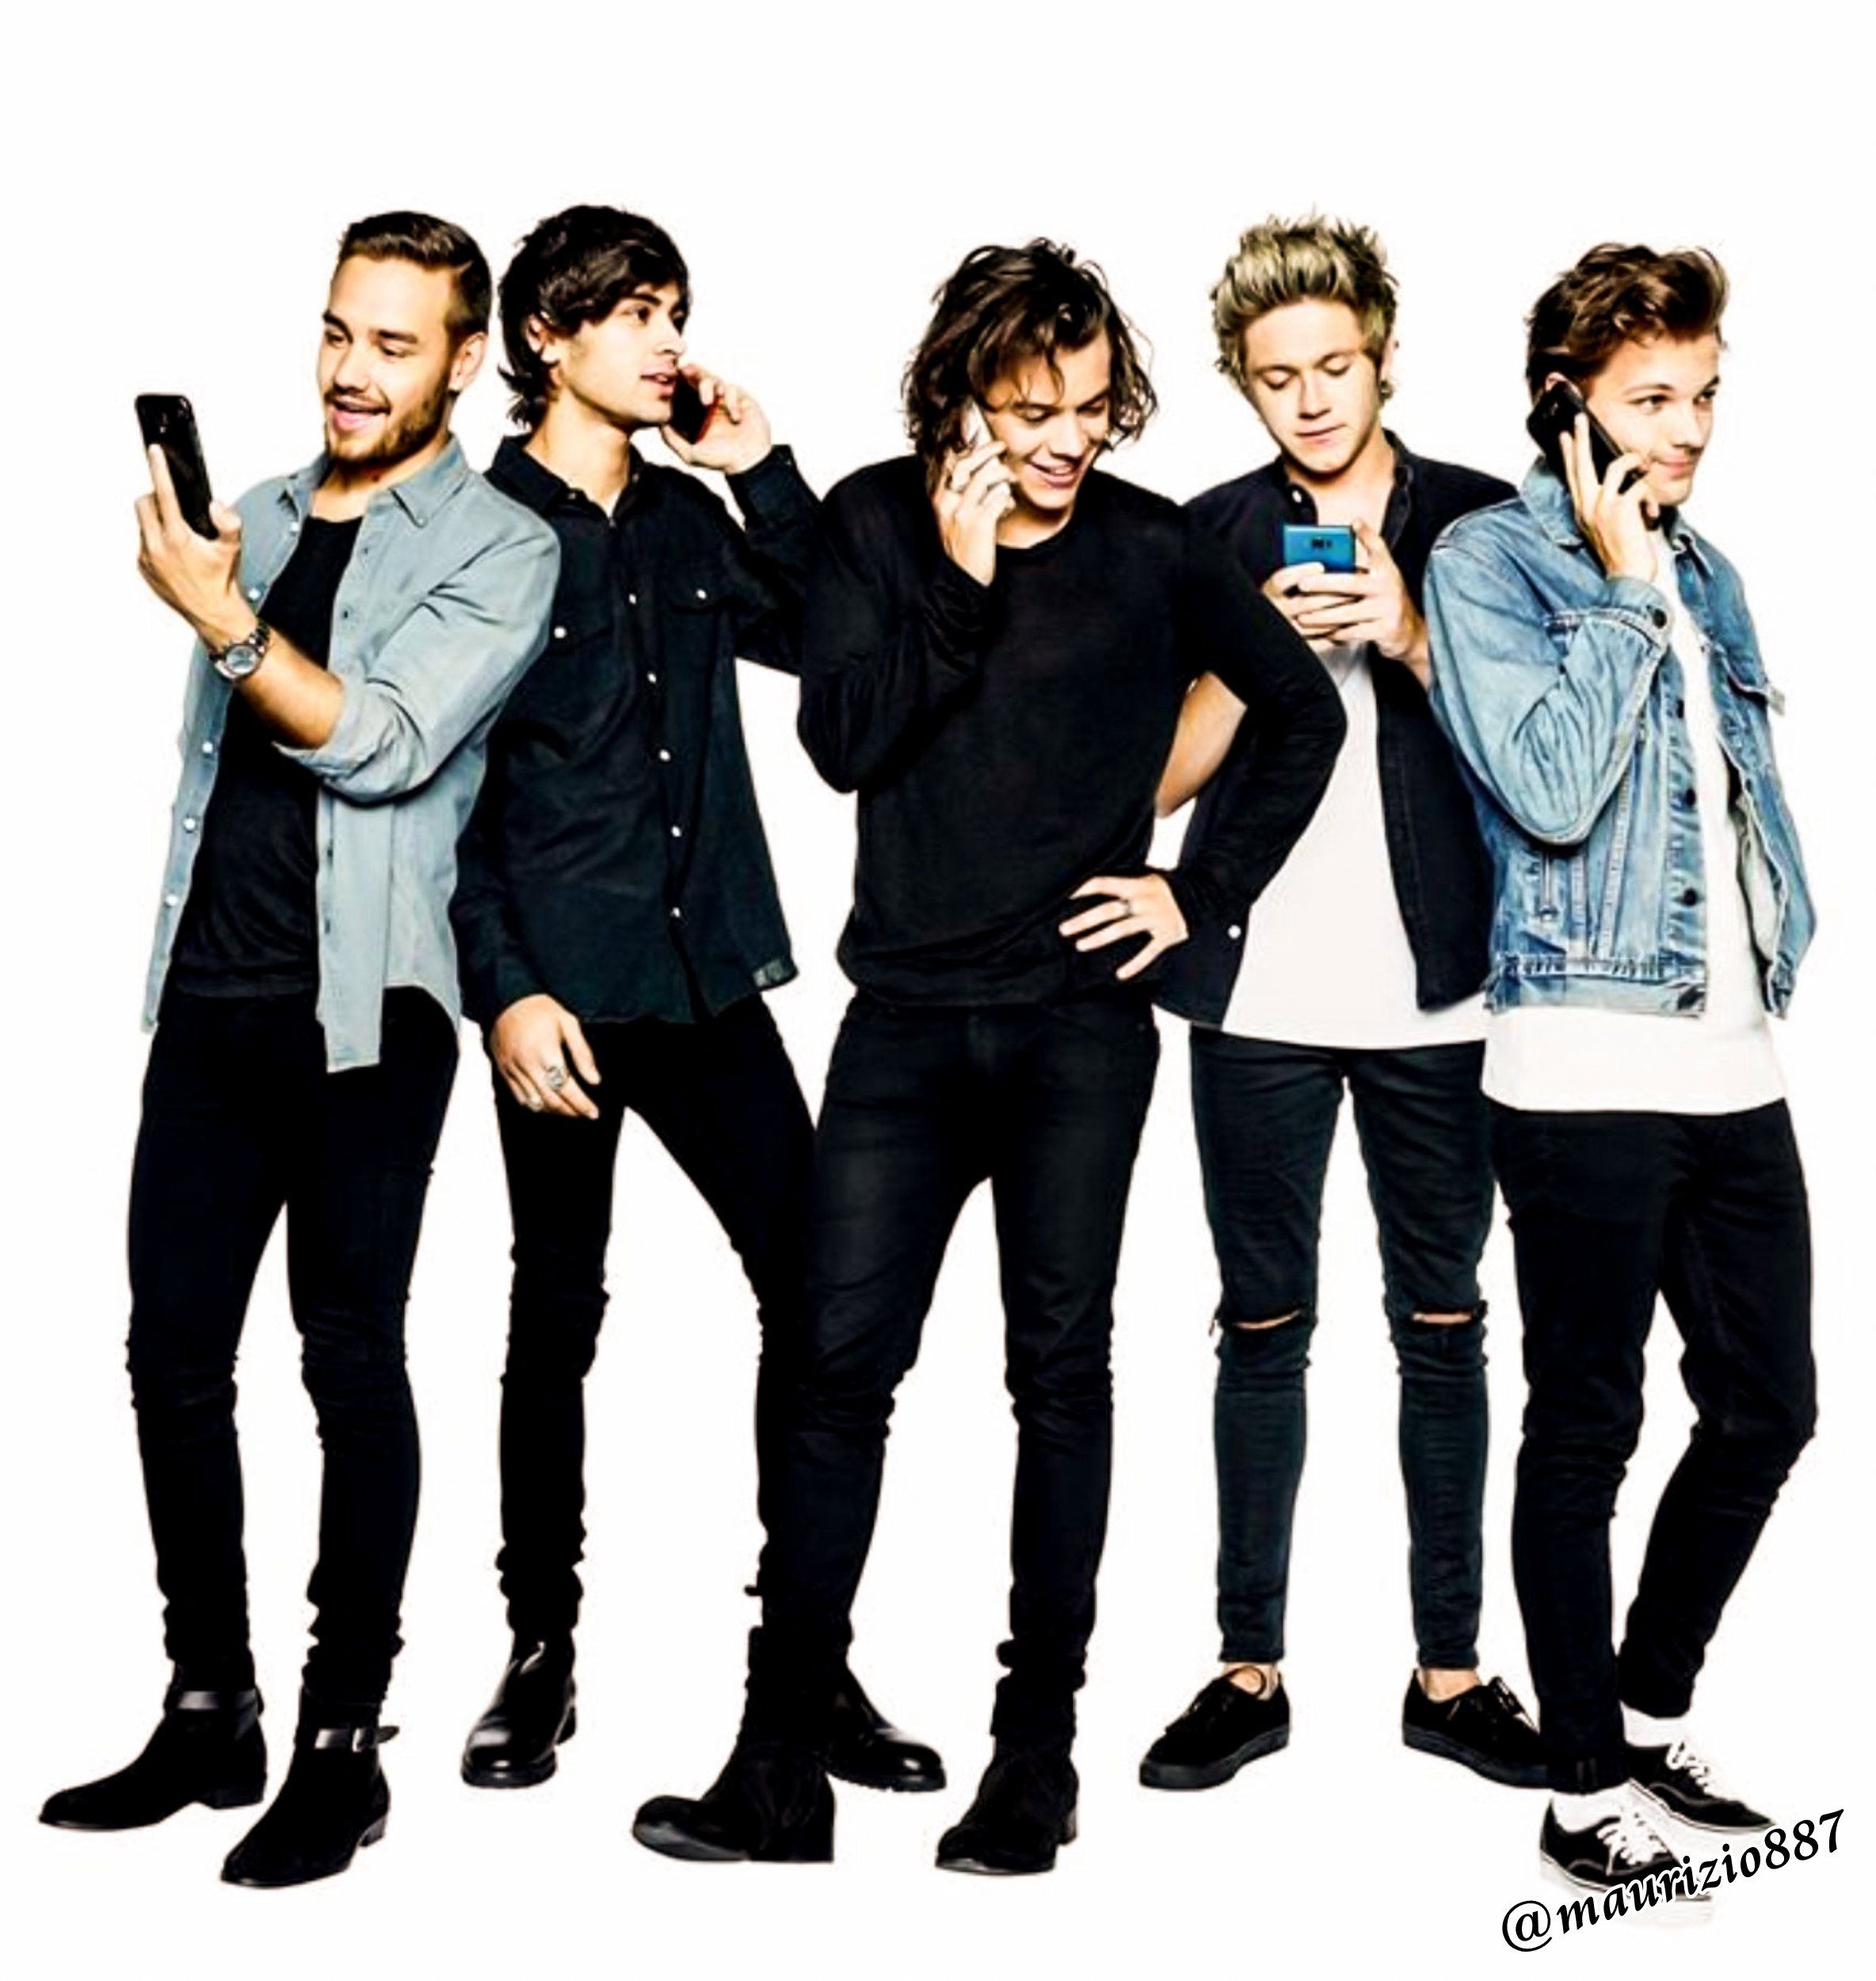 Wallpapers Of One Direction posted by John Peltier.